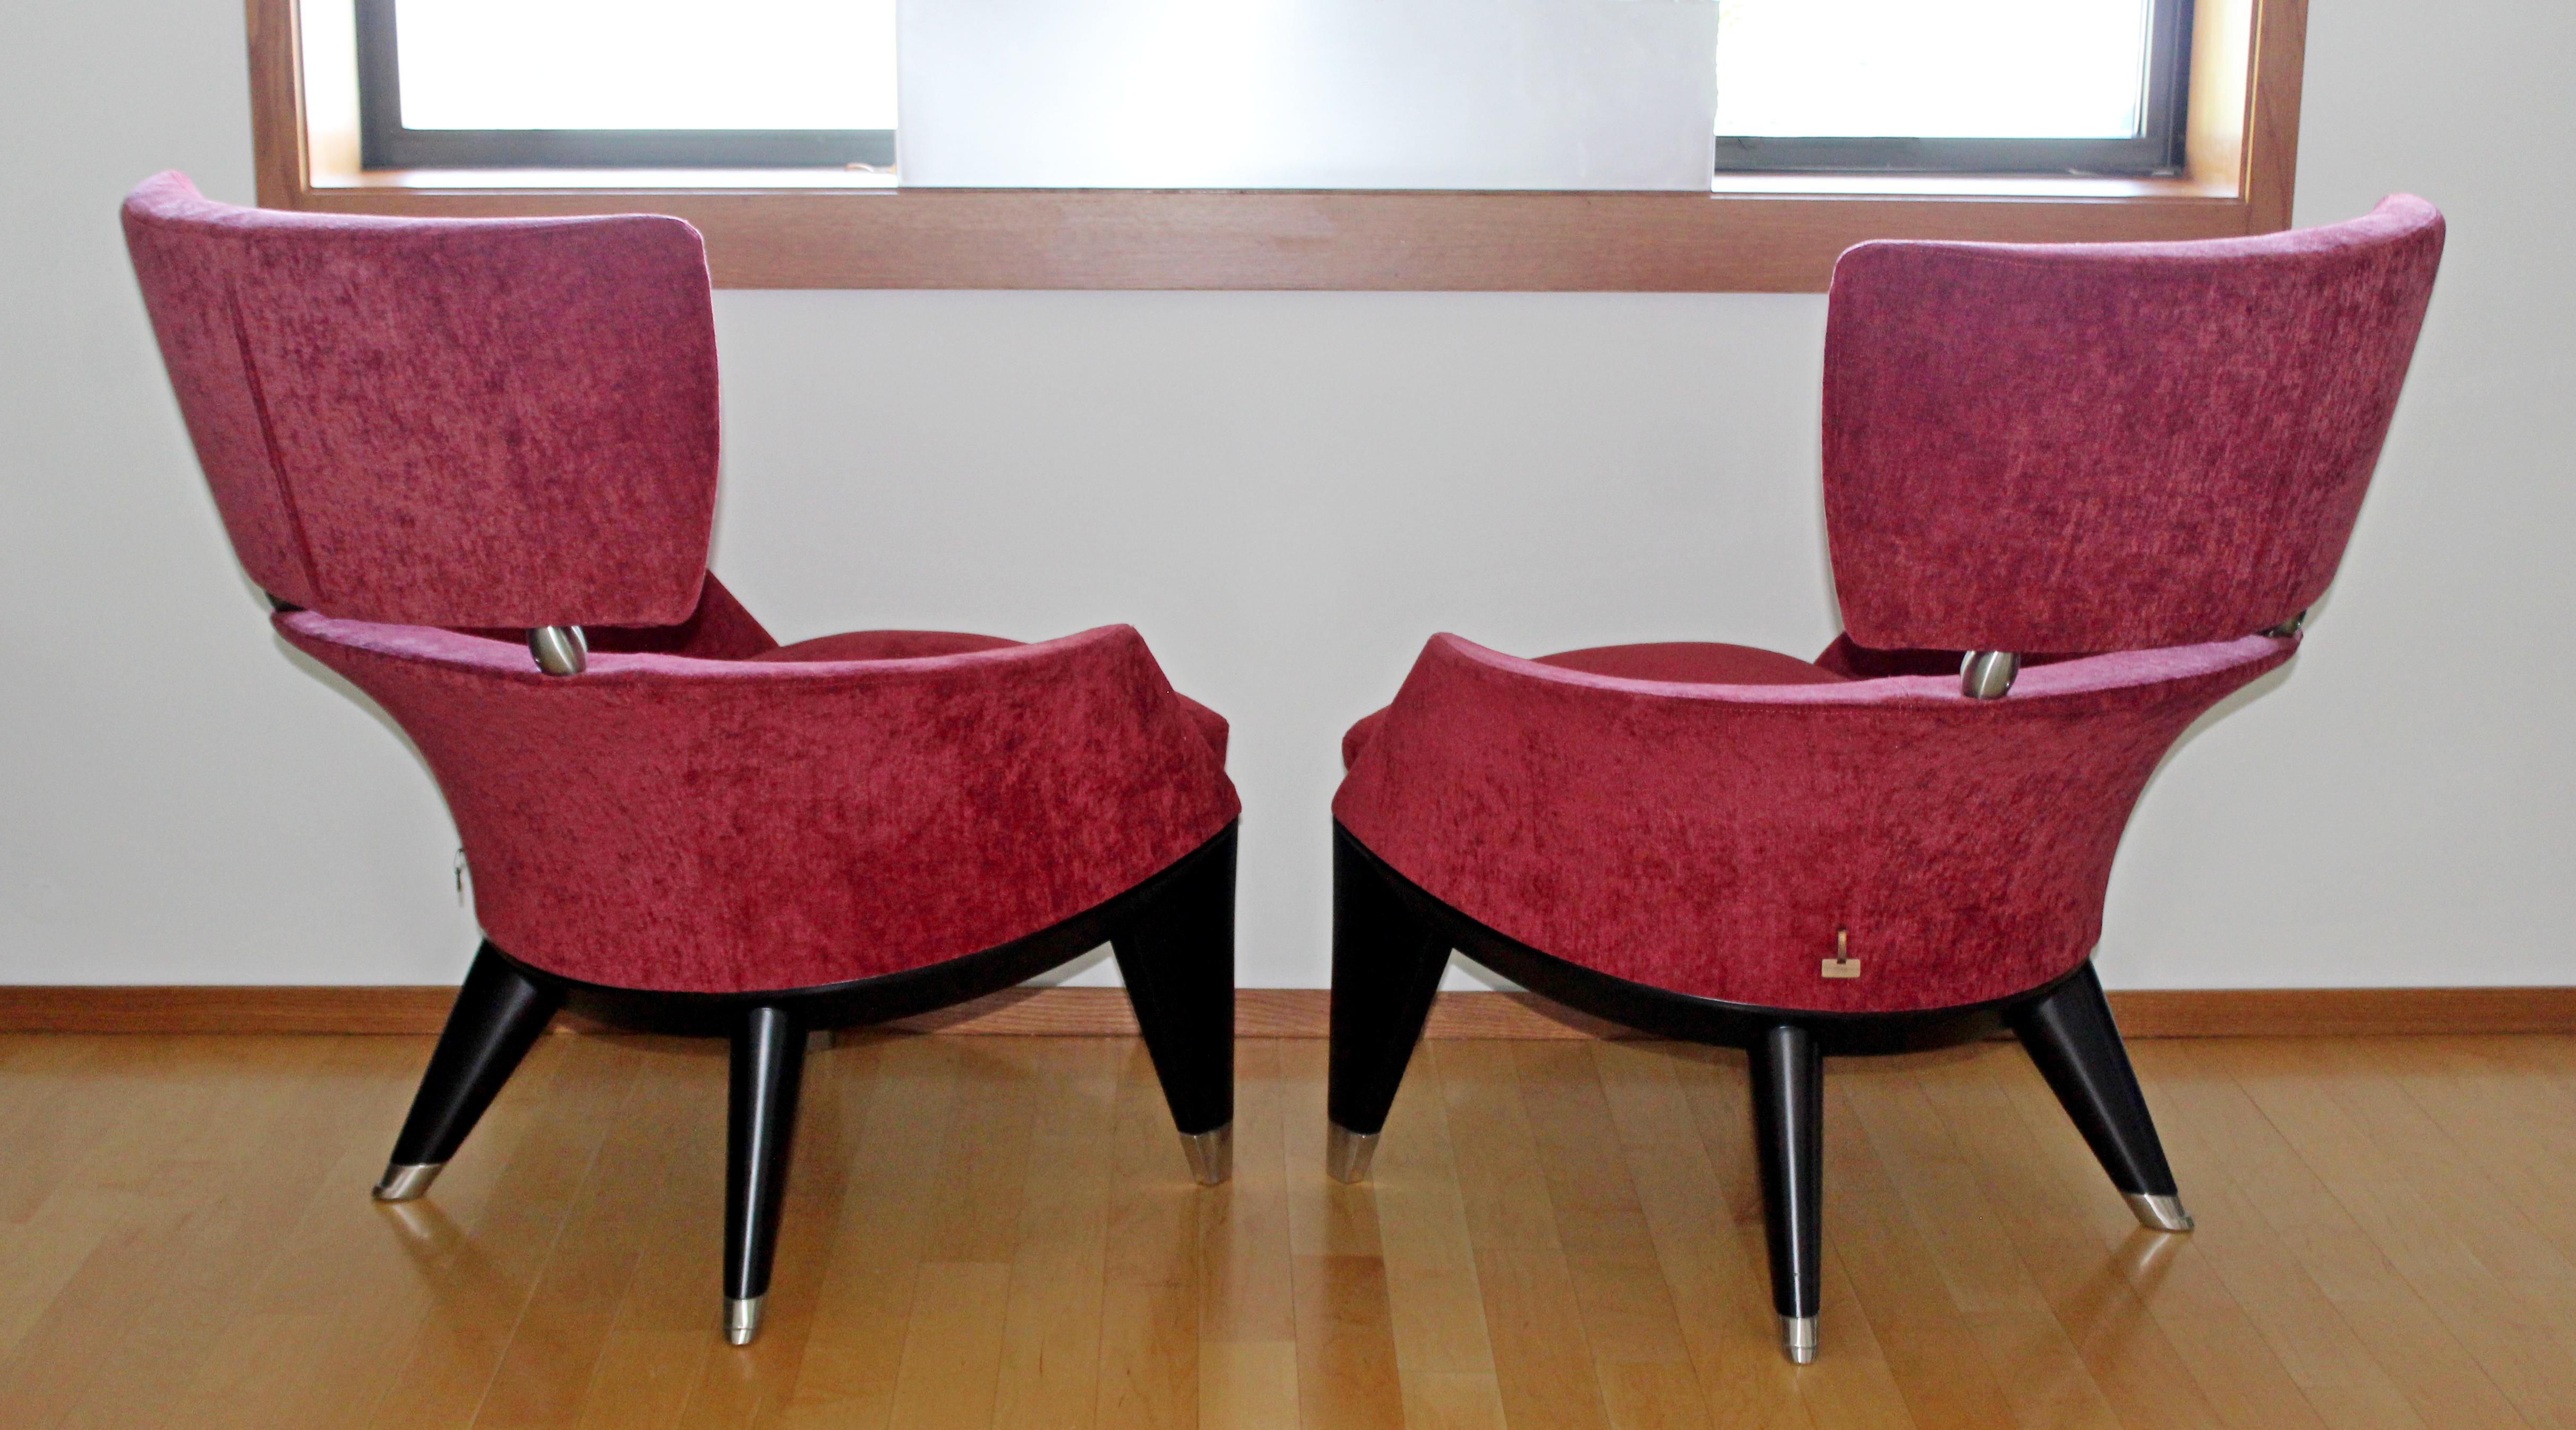 Italian Contemporary Modern Pair of Leon Krier for Giorgetti Armchairs 1990s Italy Red